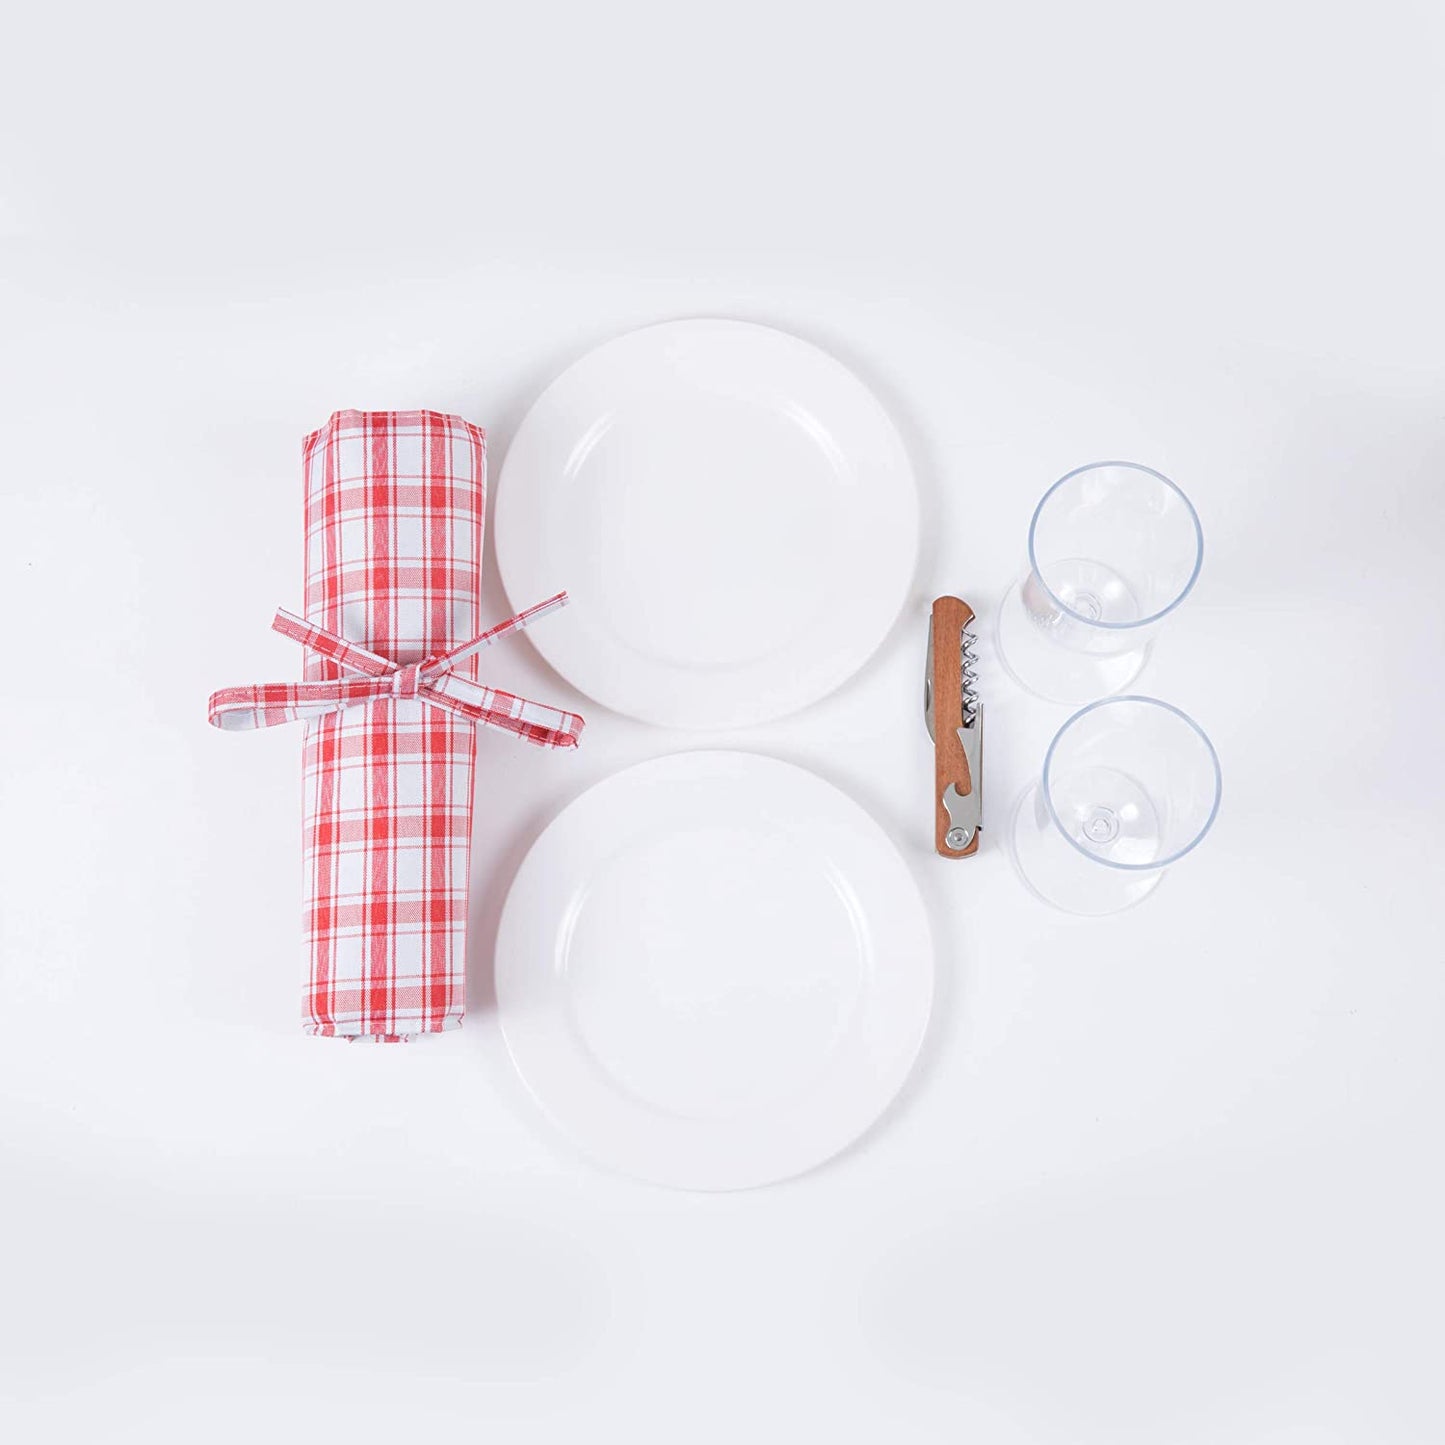 Piccadilly Picnic Basket - Romantic Picnic Basket for 2 with Picnic Set, (Red & White Plaid Pattern)